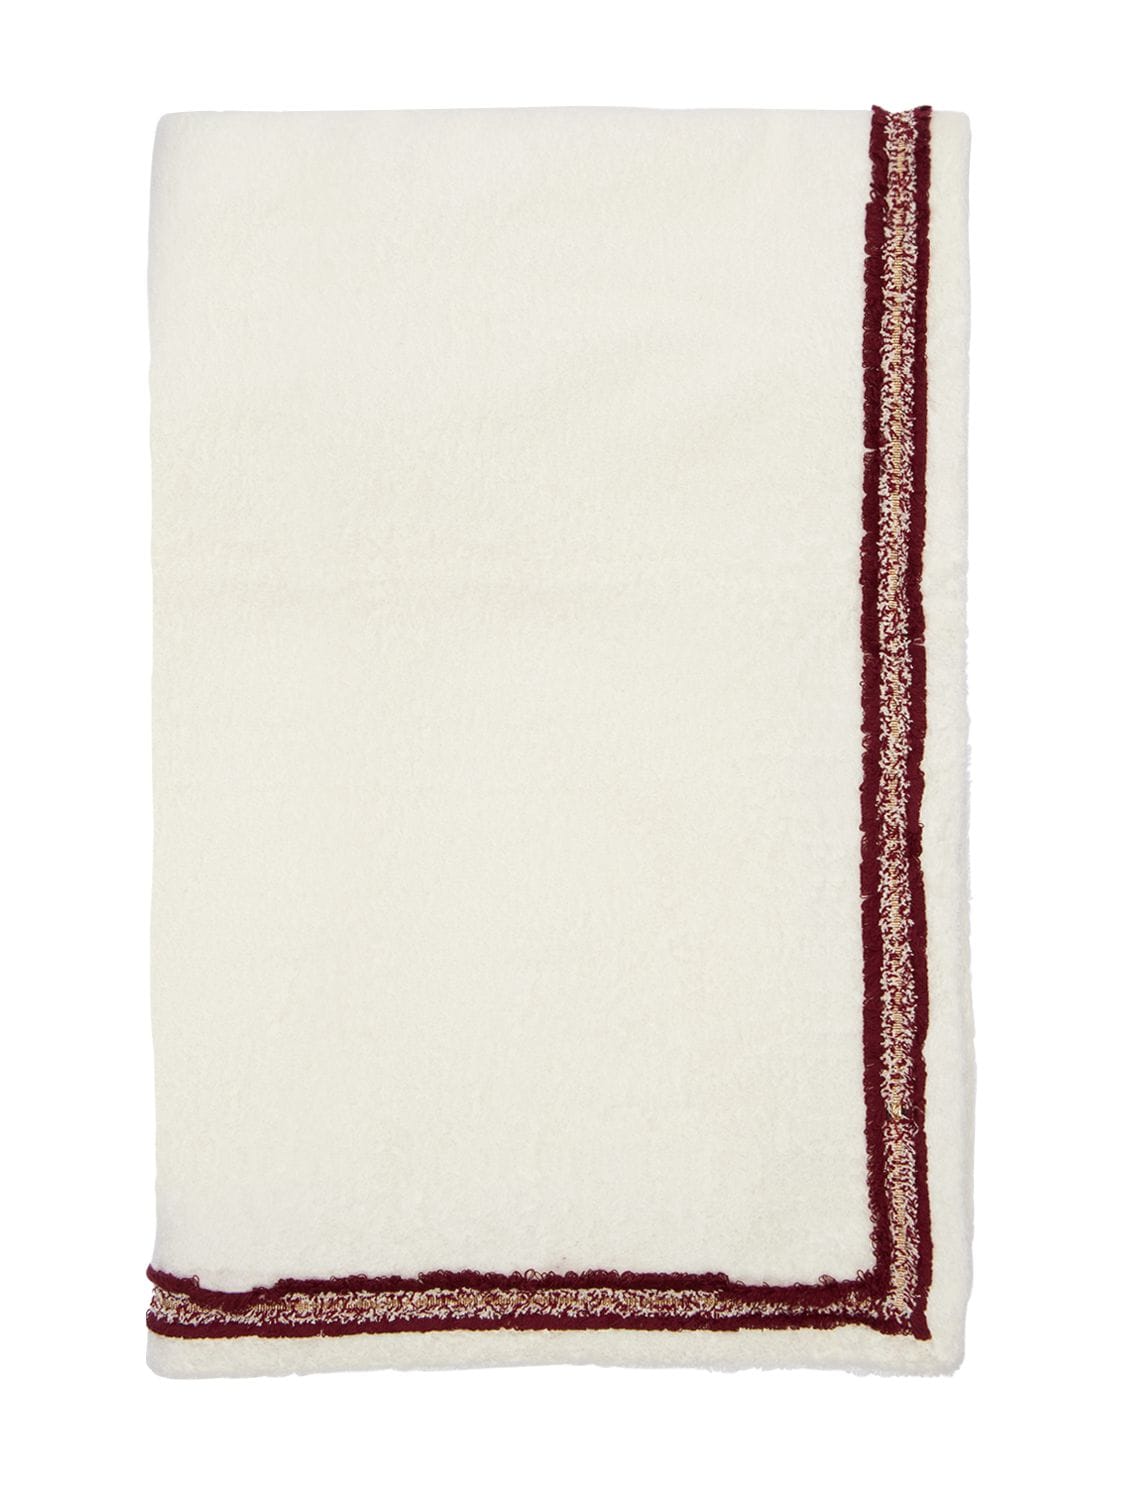 Alessandro Di Marco Cotton Terrycloth Beach Towel In White,red